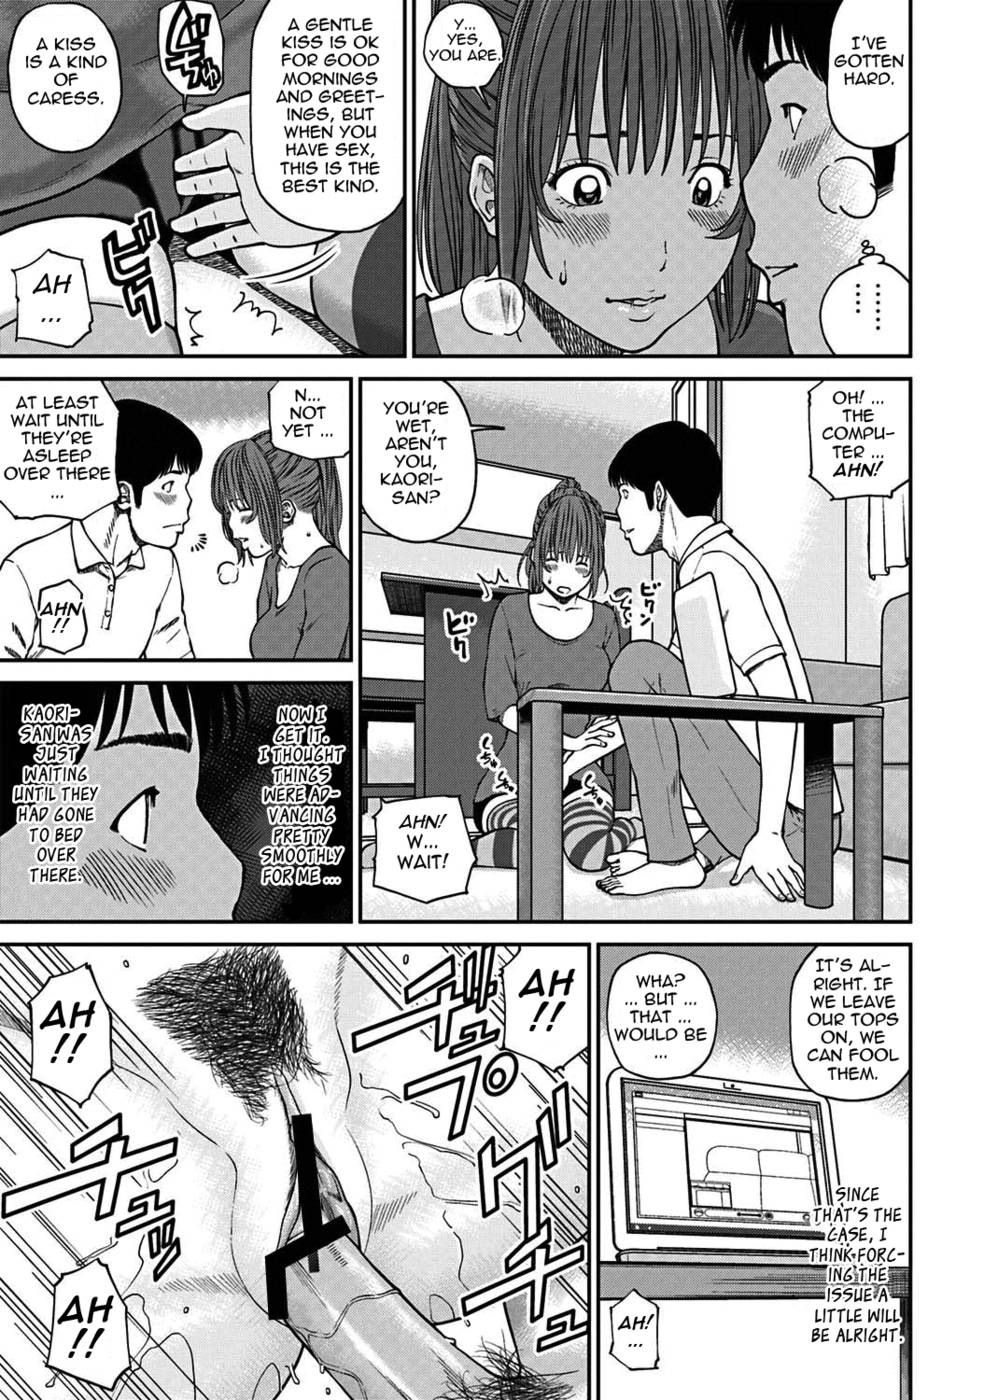 Hentai Manga Comic-33 Year Old Unsatisfied Wife-Chapter 4-Spouse Swapping-Final Day-11